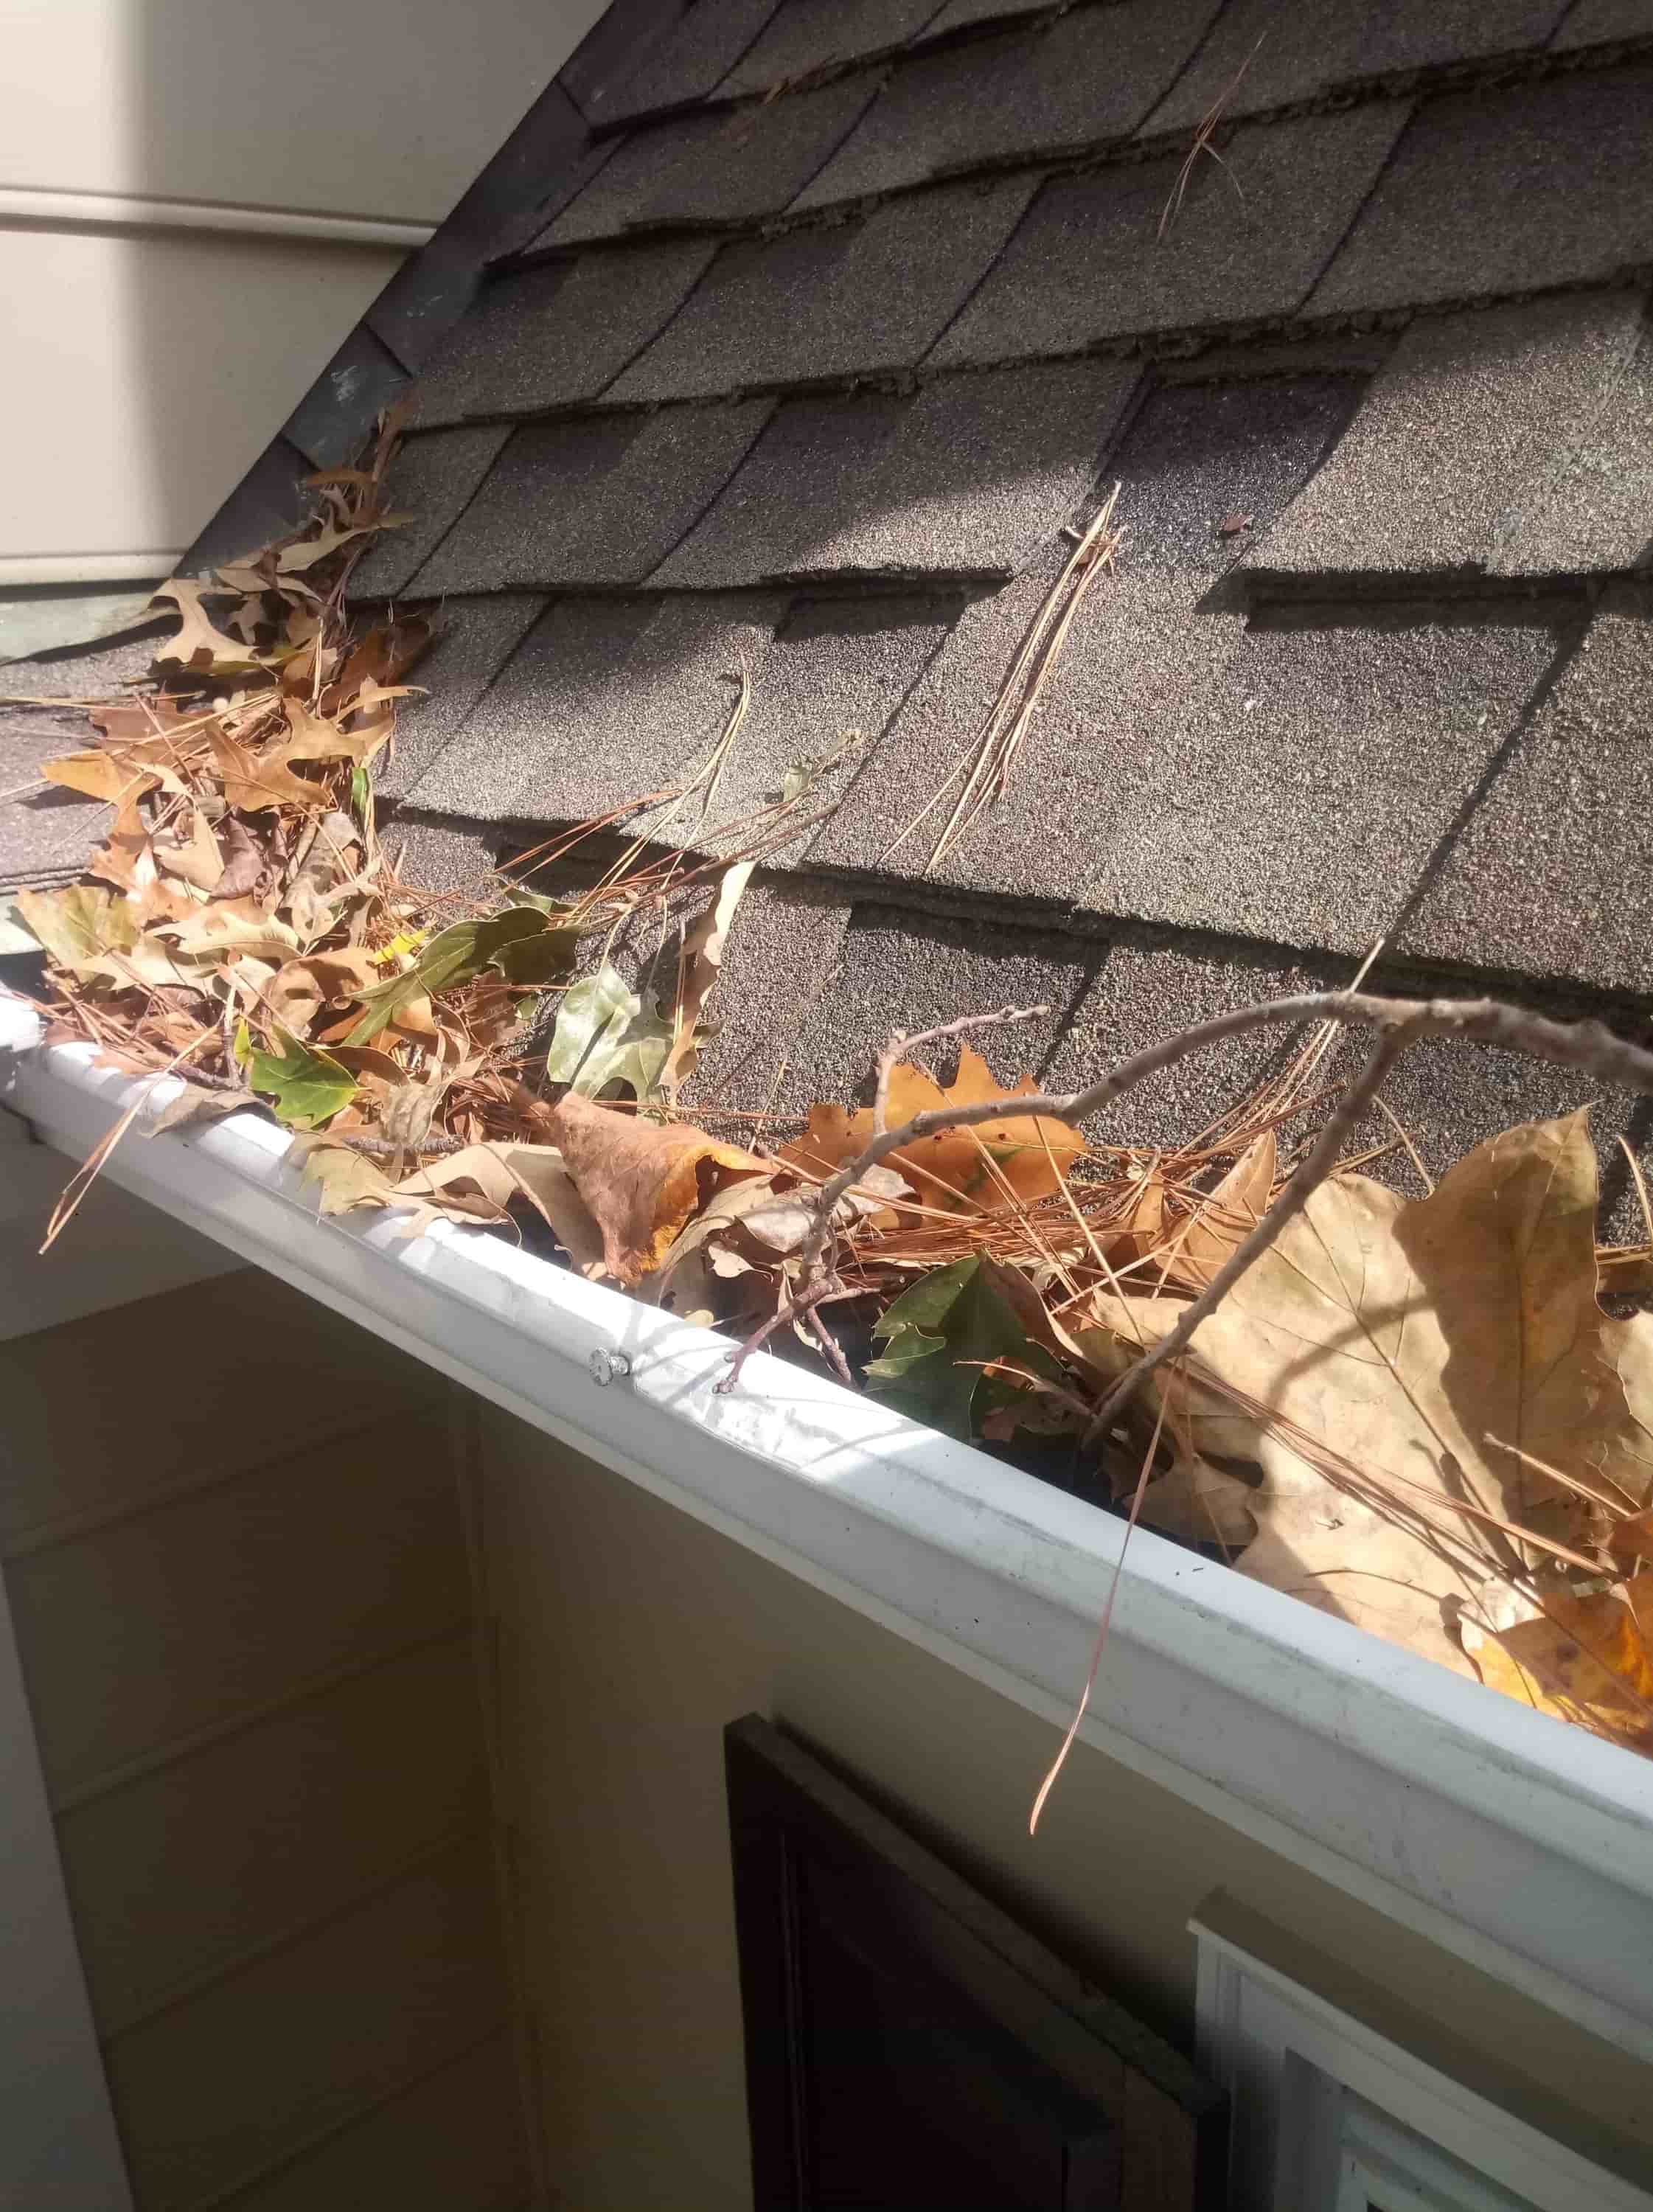 clean gutters from ground level